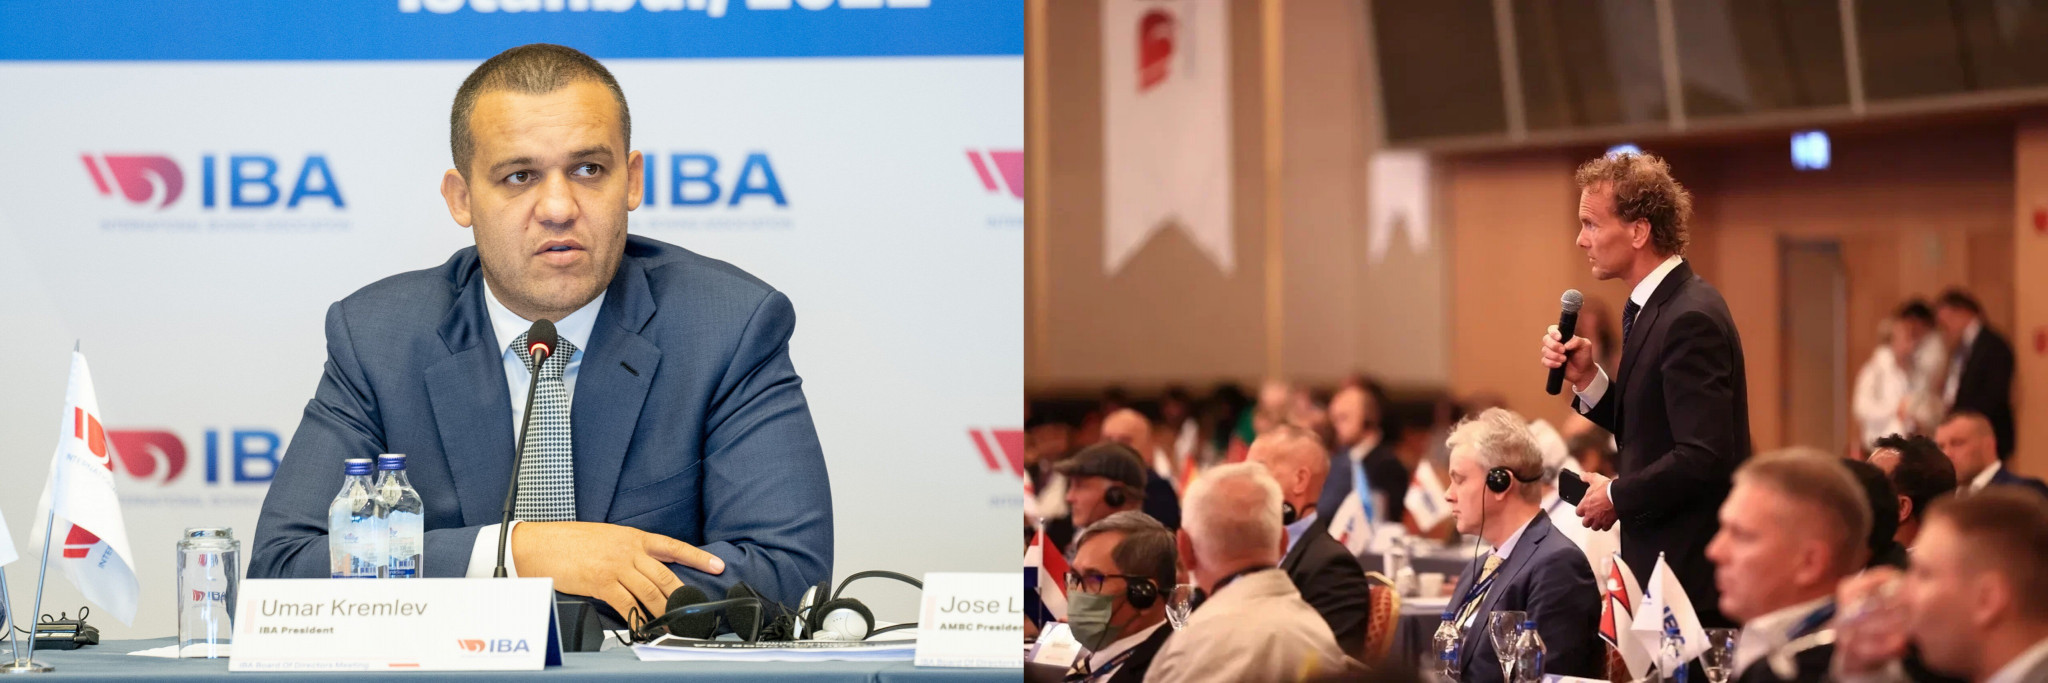 Van der Vorst aims to challenge Kremlev for IBA Presidency if fresh election approved at Extraordinary Congress